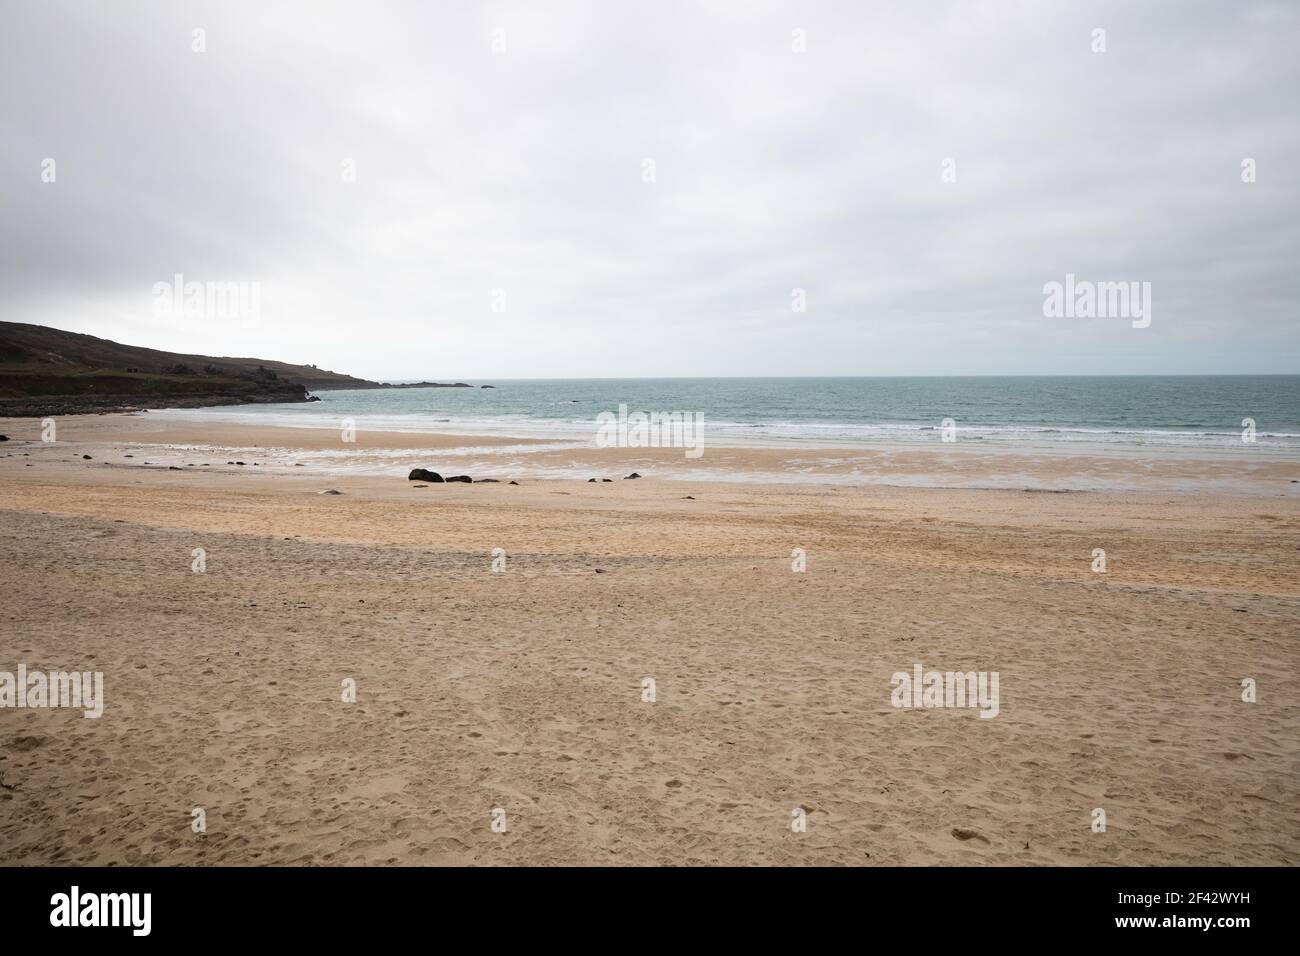 A view across Porthmeor Beach in St Ives, Cornwall, UK Stock Photo